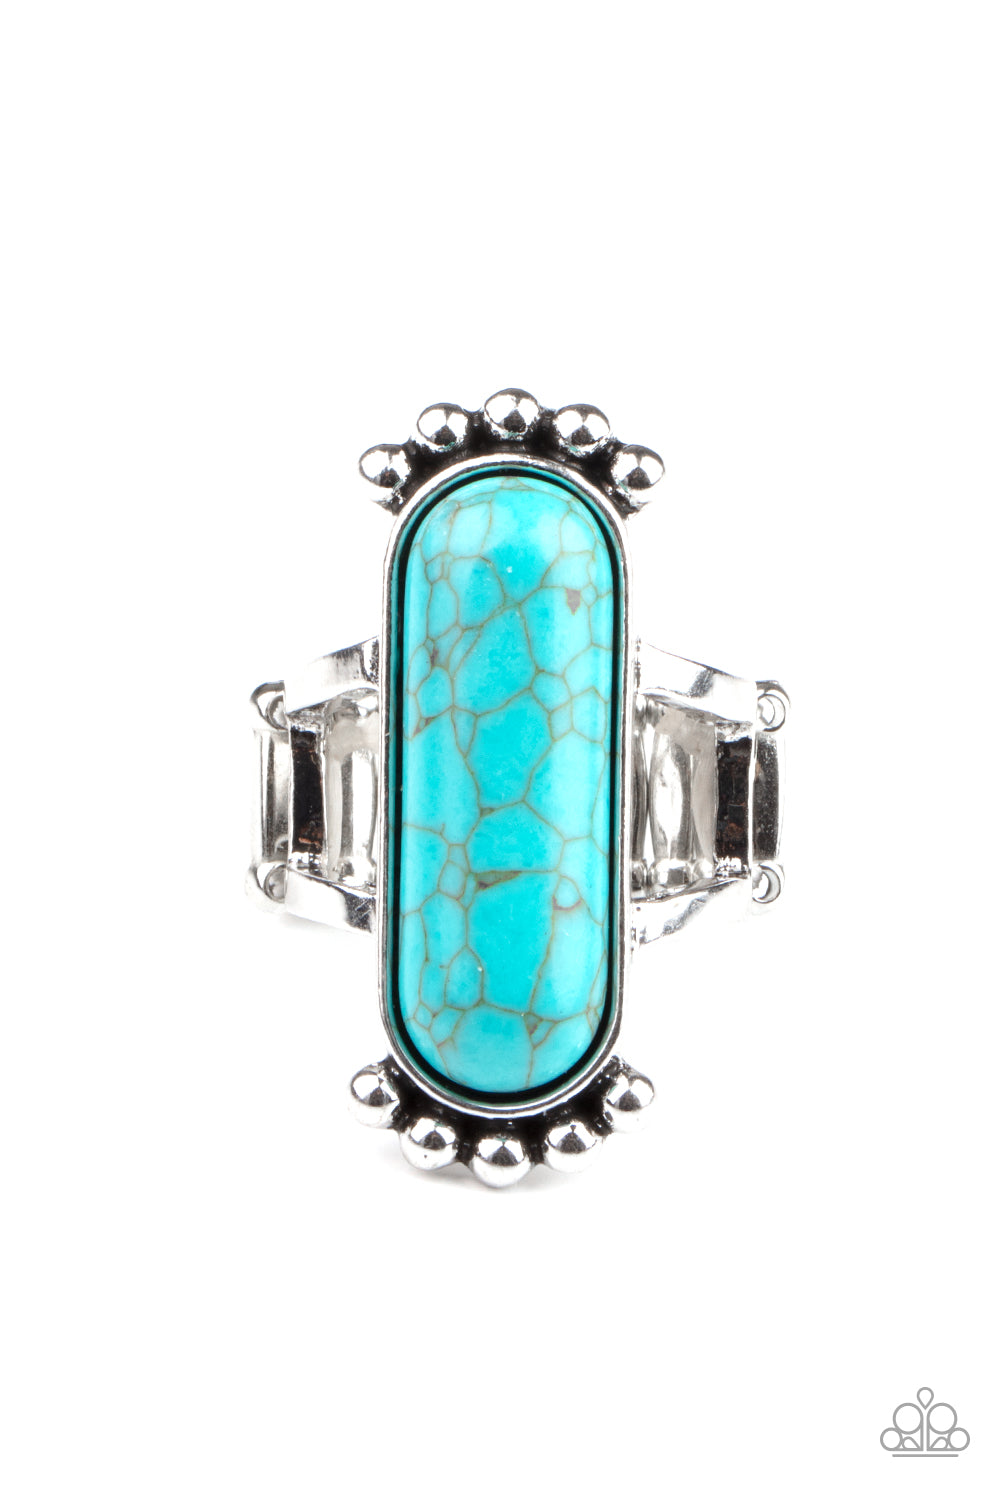 Ranch Relic - Blue Turquoise Paparazzi Ring